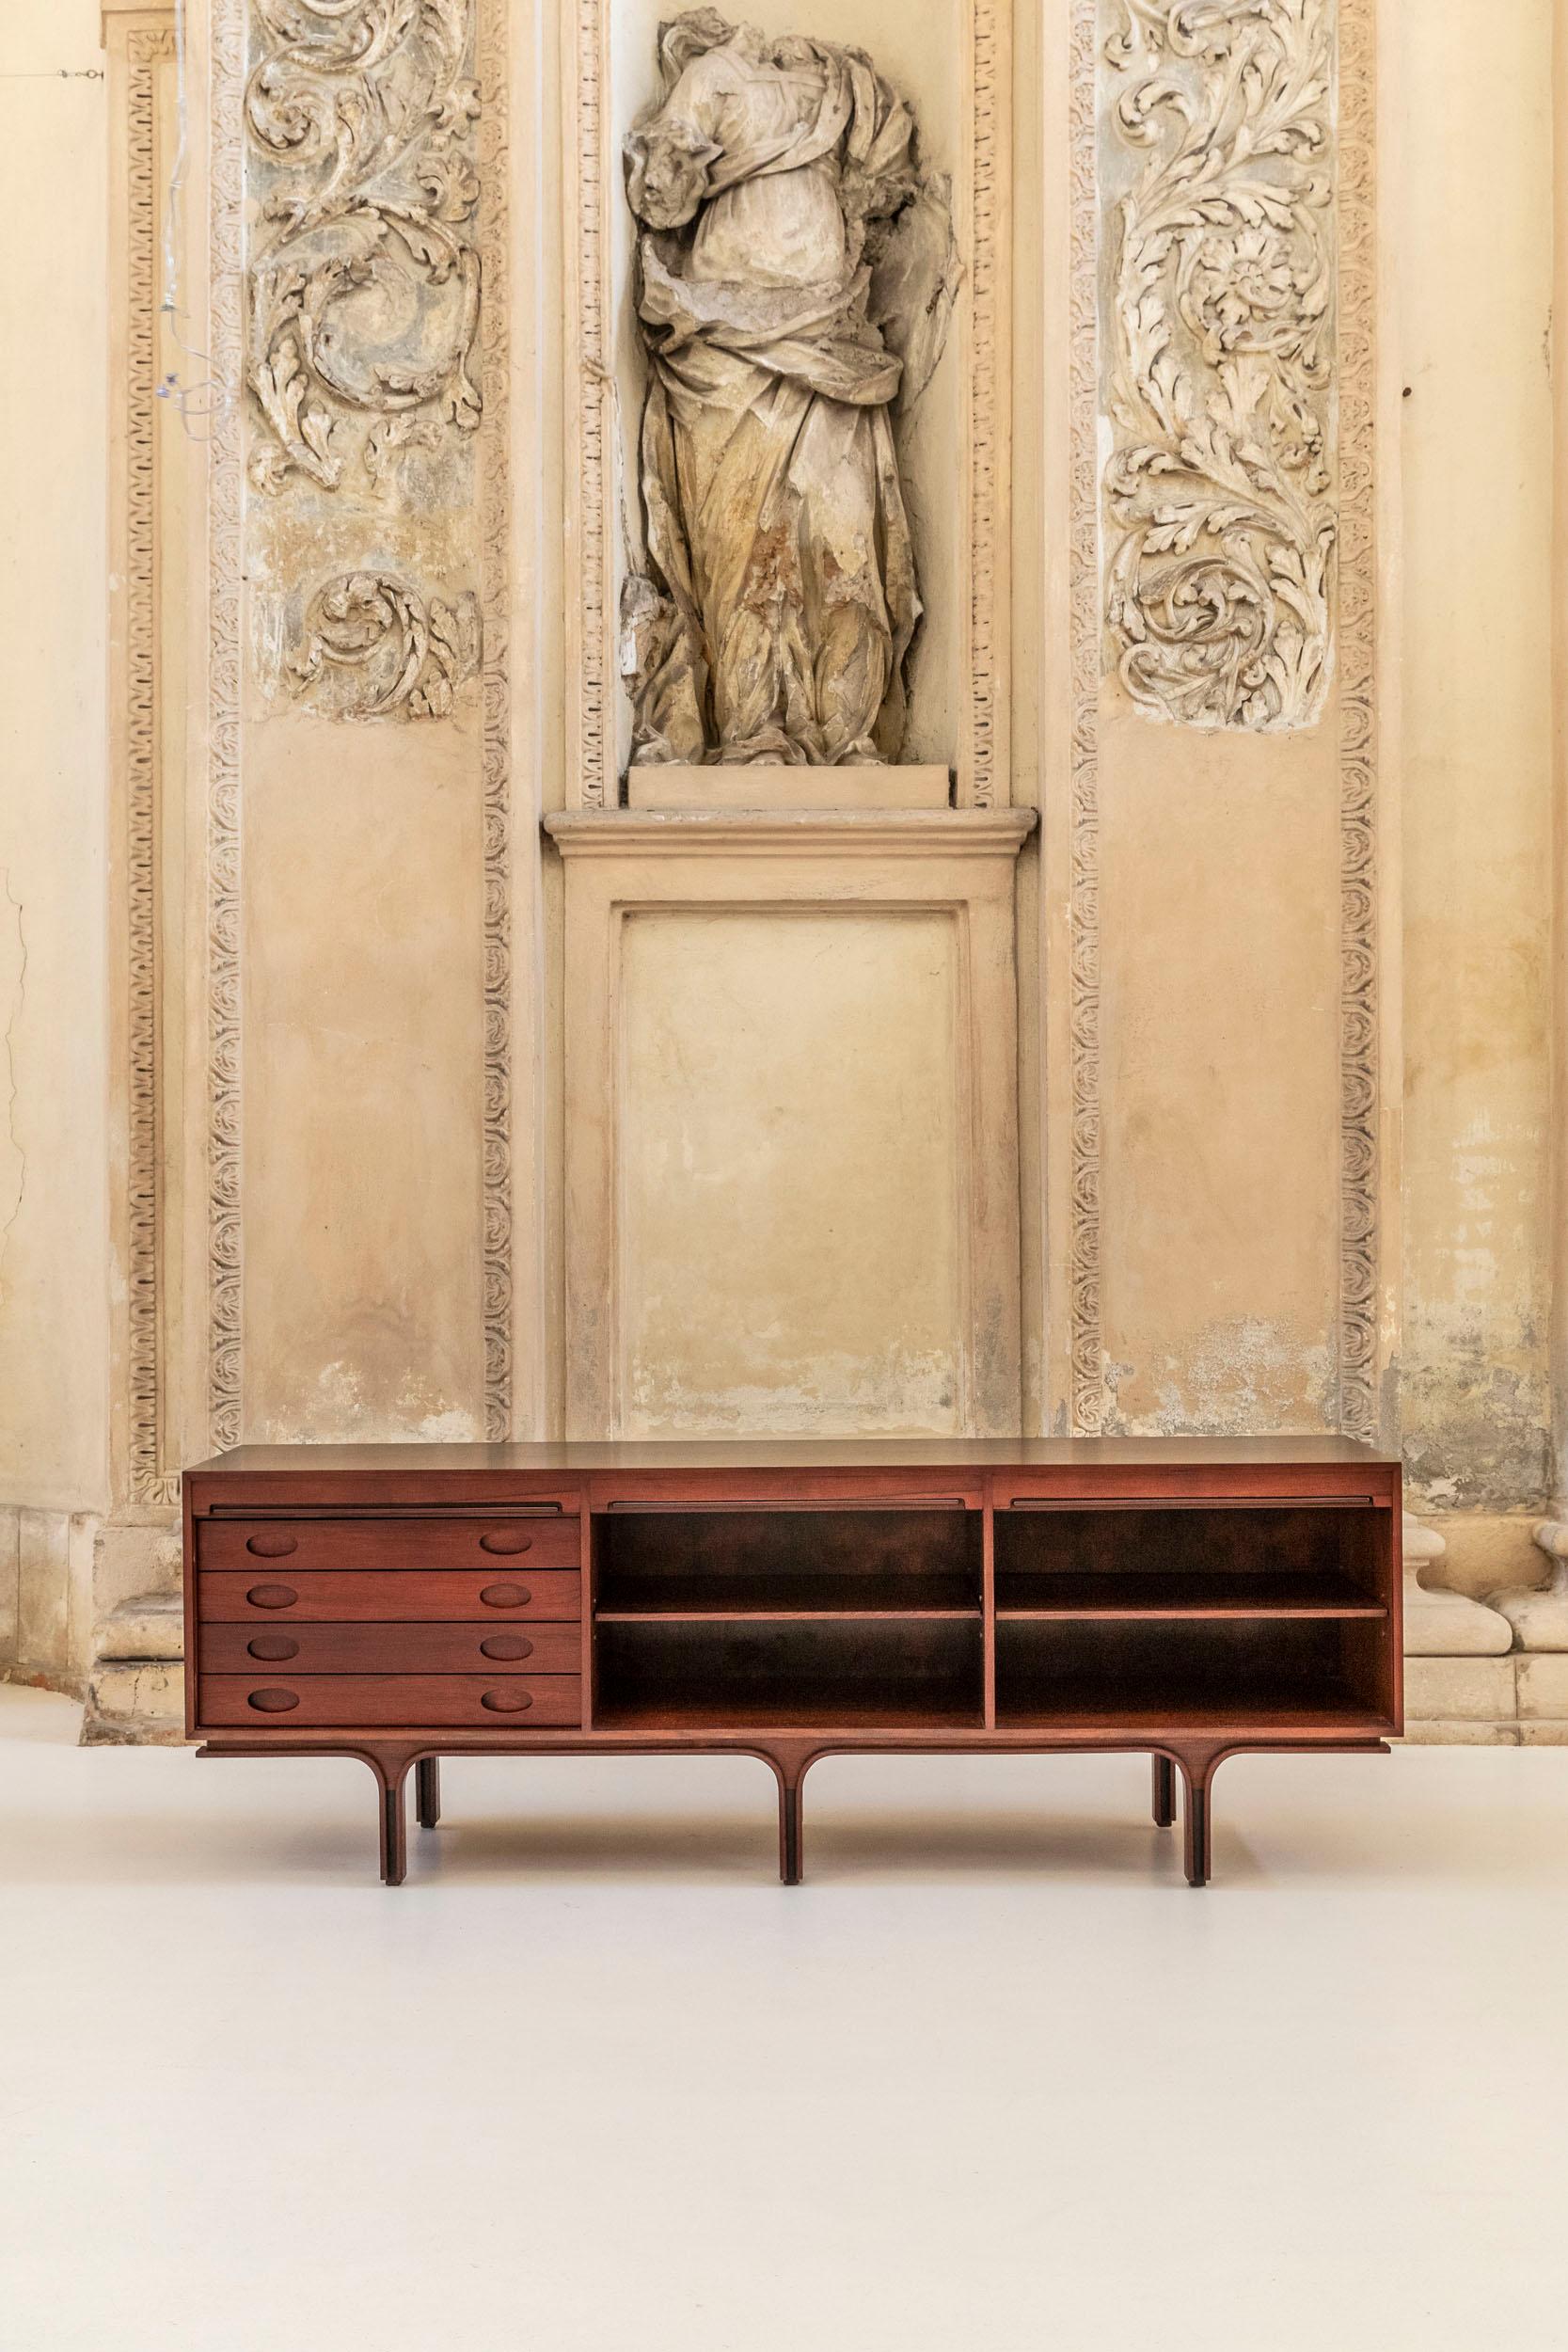 Iconic sideboard, model 503, design by Gianfranco Frattini, manufactured by Bernini, 1960 Italy circa. 
Three vertical tambour doors, four drawers on the left side and adjustable shelves in the other two sections.

Bibliography 